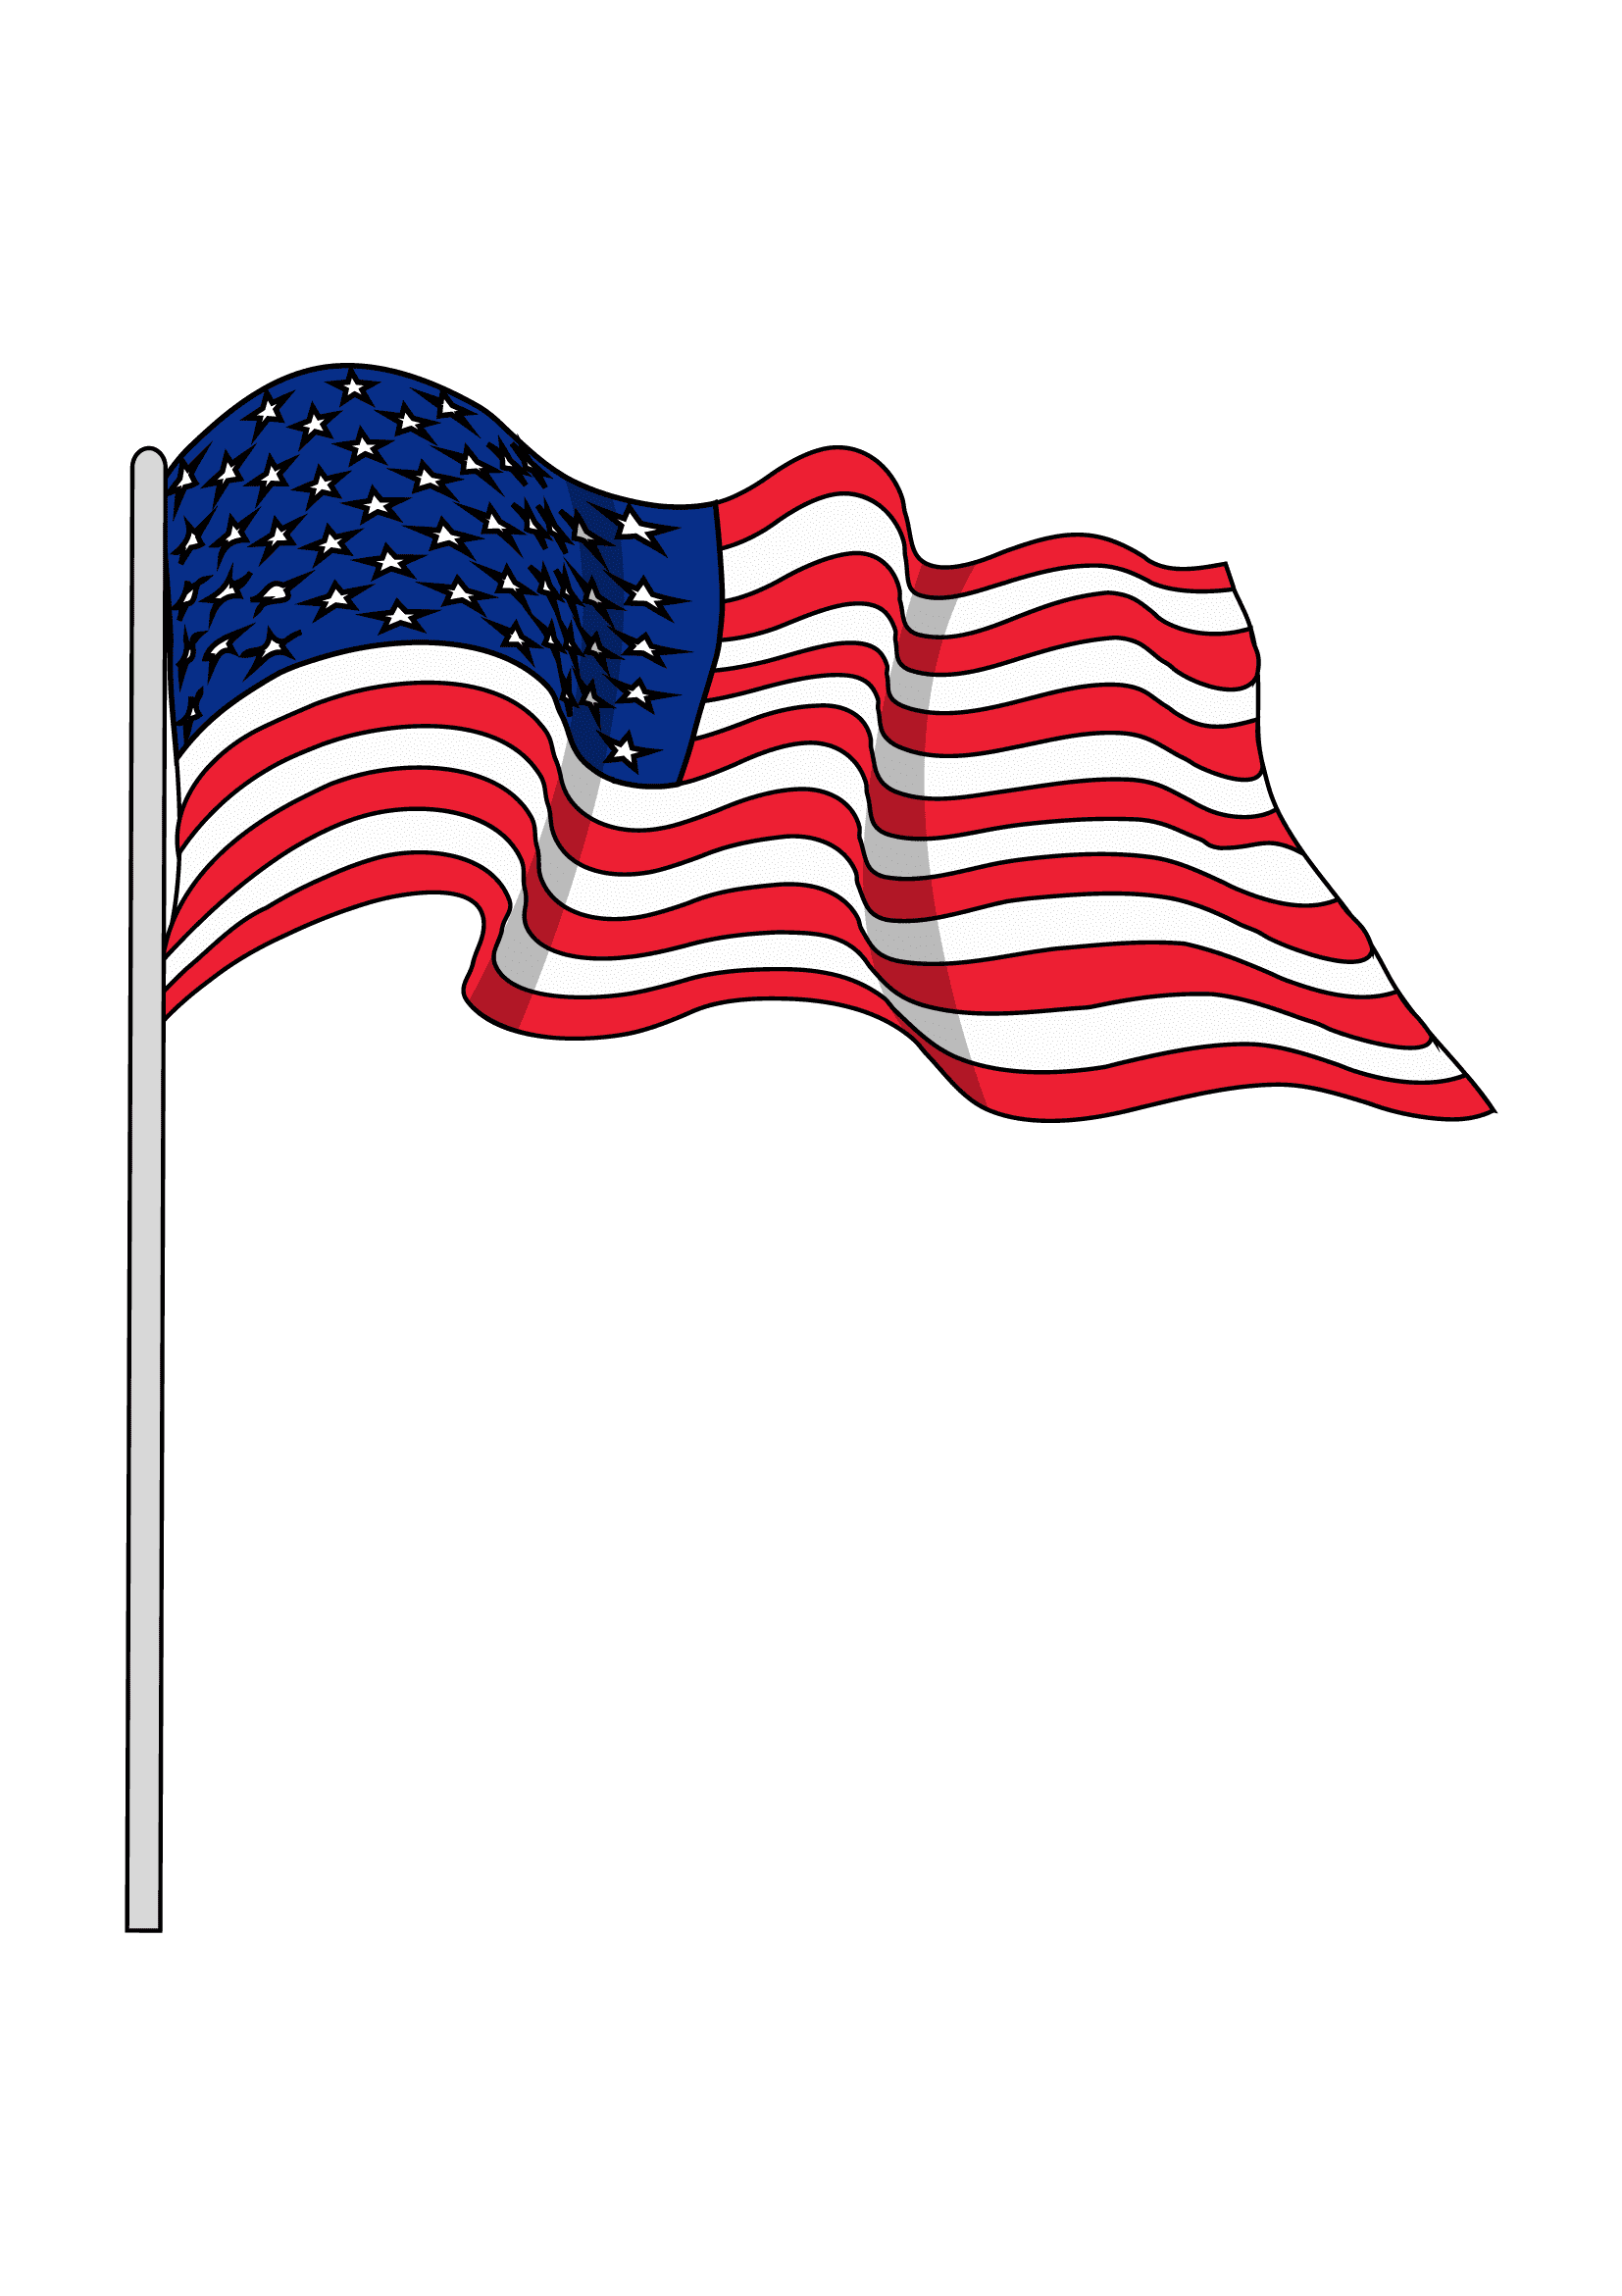 How to Draw The American Flag Step by Step Printable